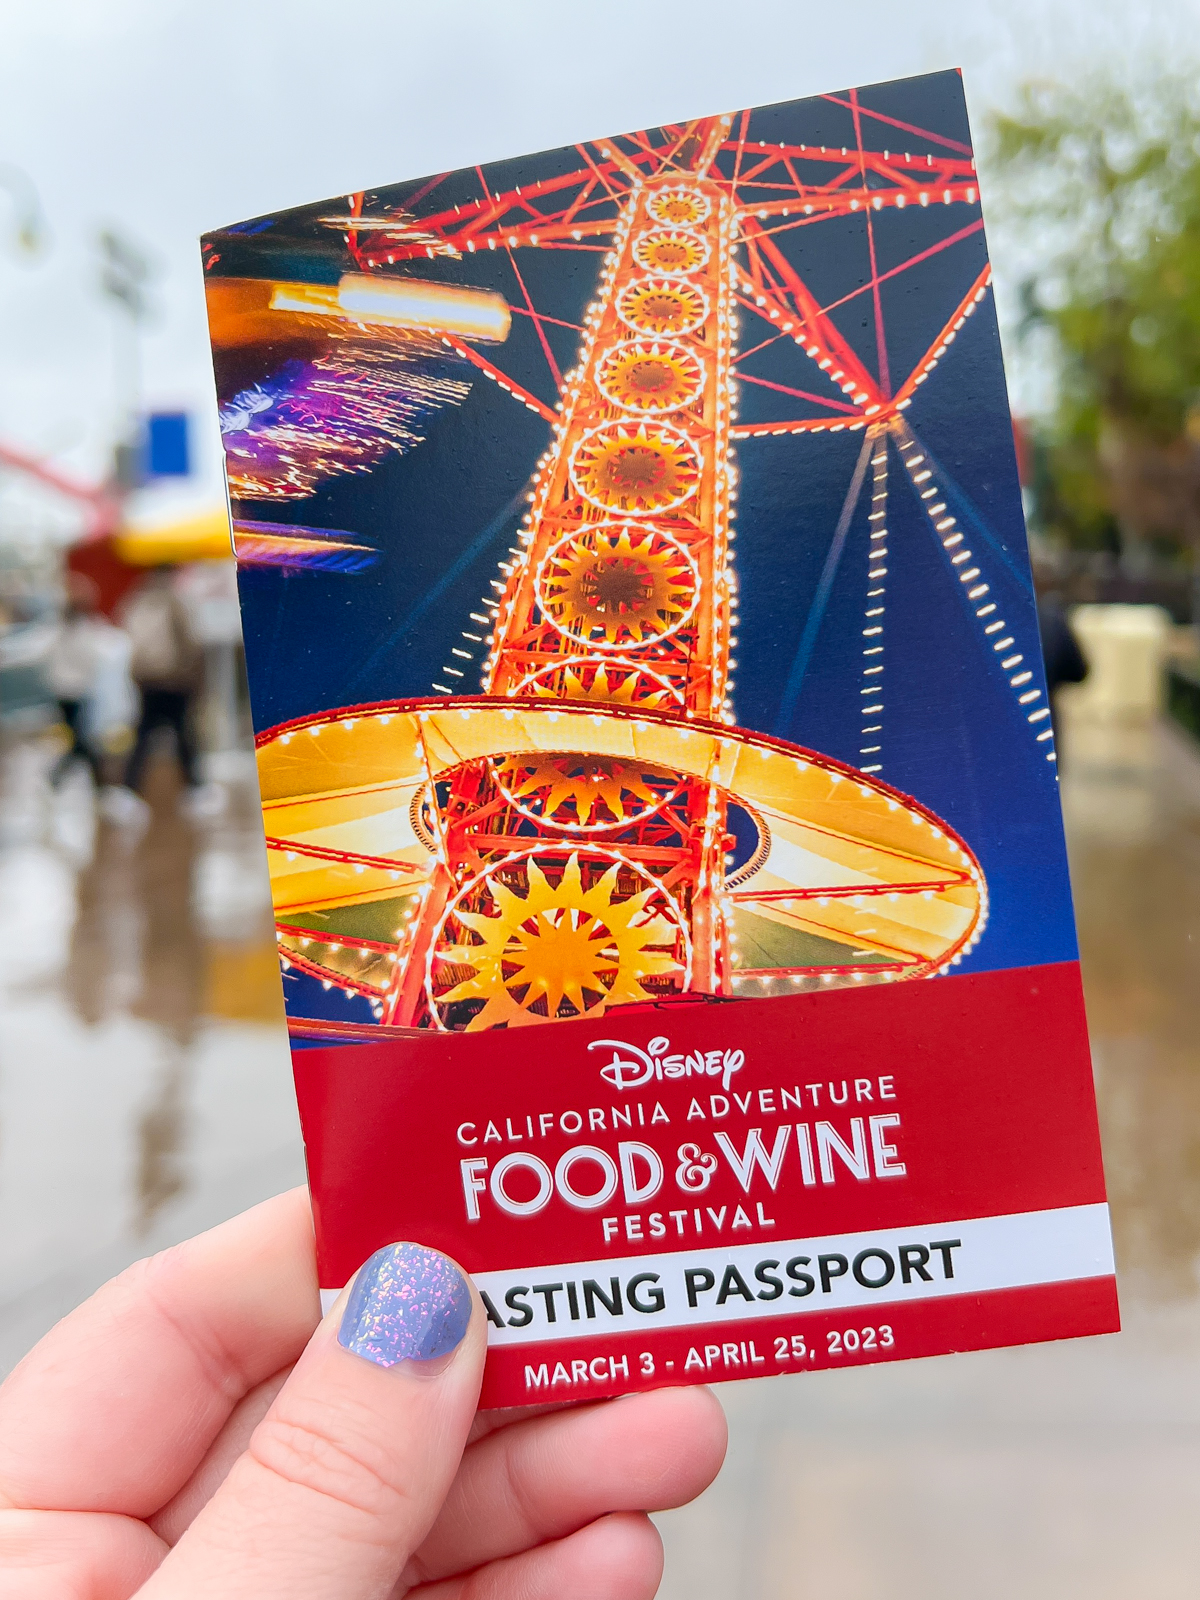 hand holding a tasting passport from the Disney food and wine festival in 2023